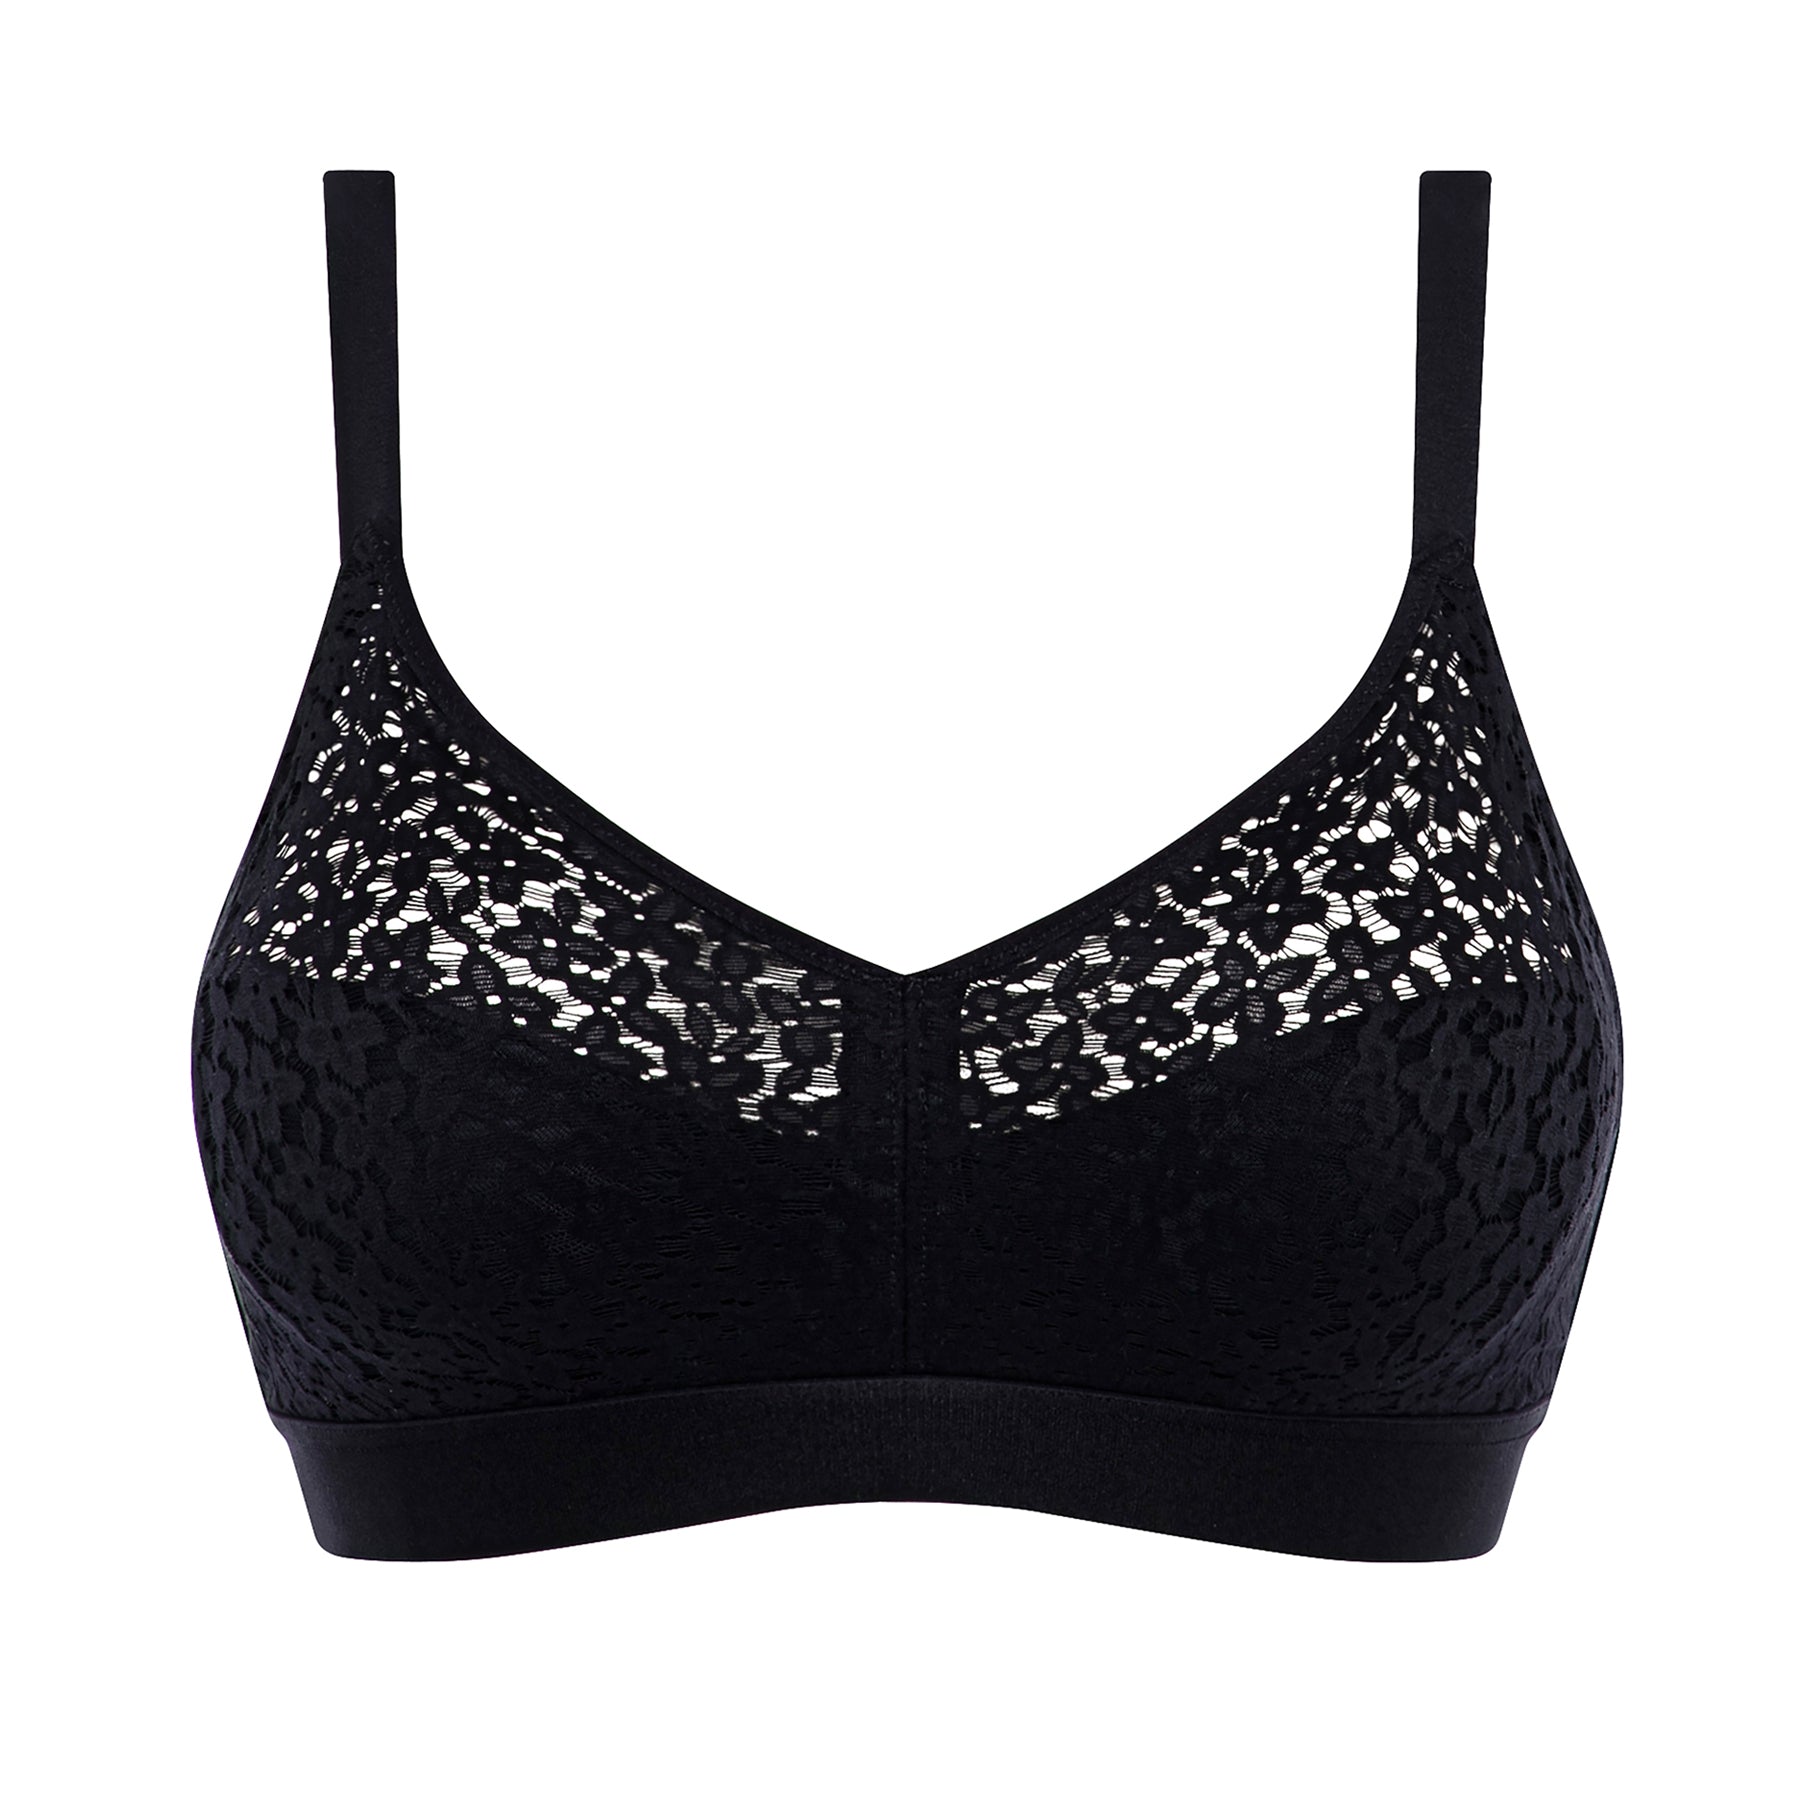 REORIAFEE Sports Comfy Bra for Seniors Comfortable Bra for Older Women Sexy  Lace Underwear Two Piece Set Black S 